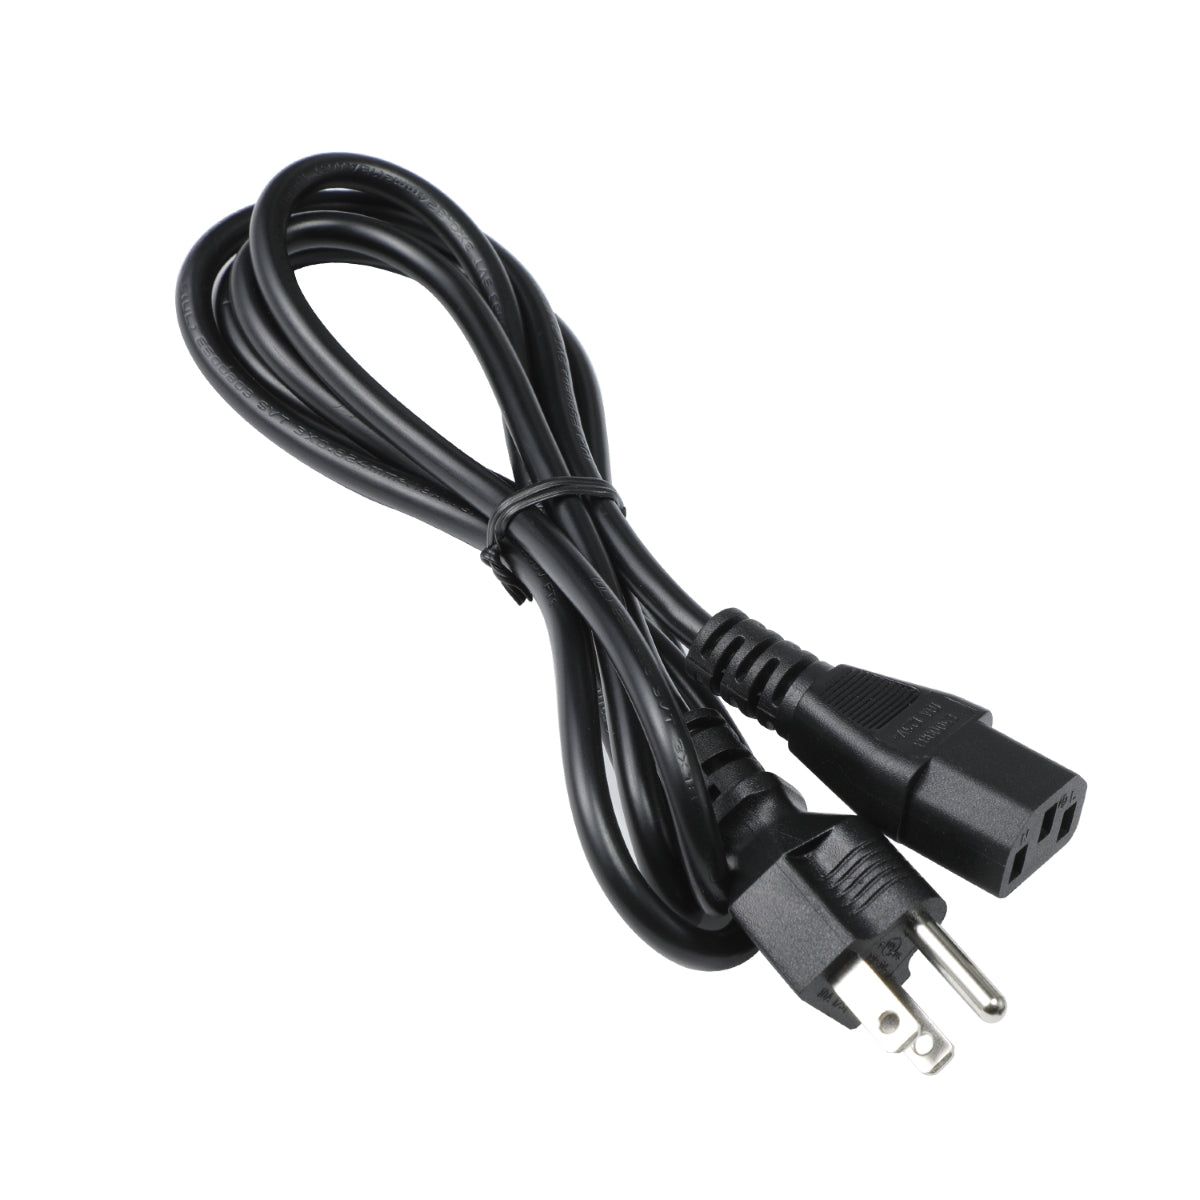 Power Cord for Dell P2720DC Monitor